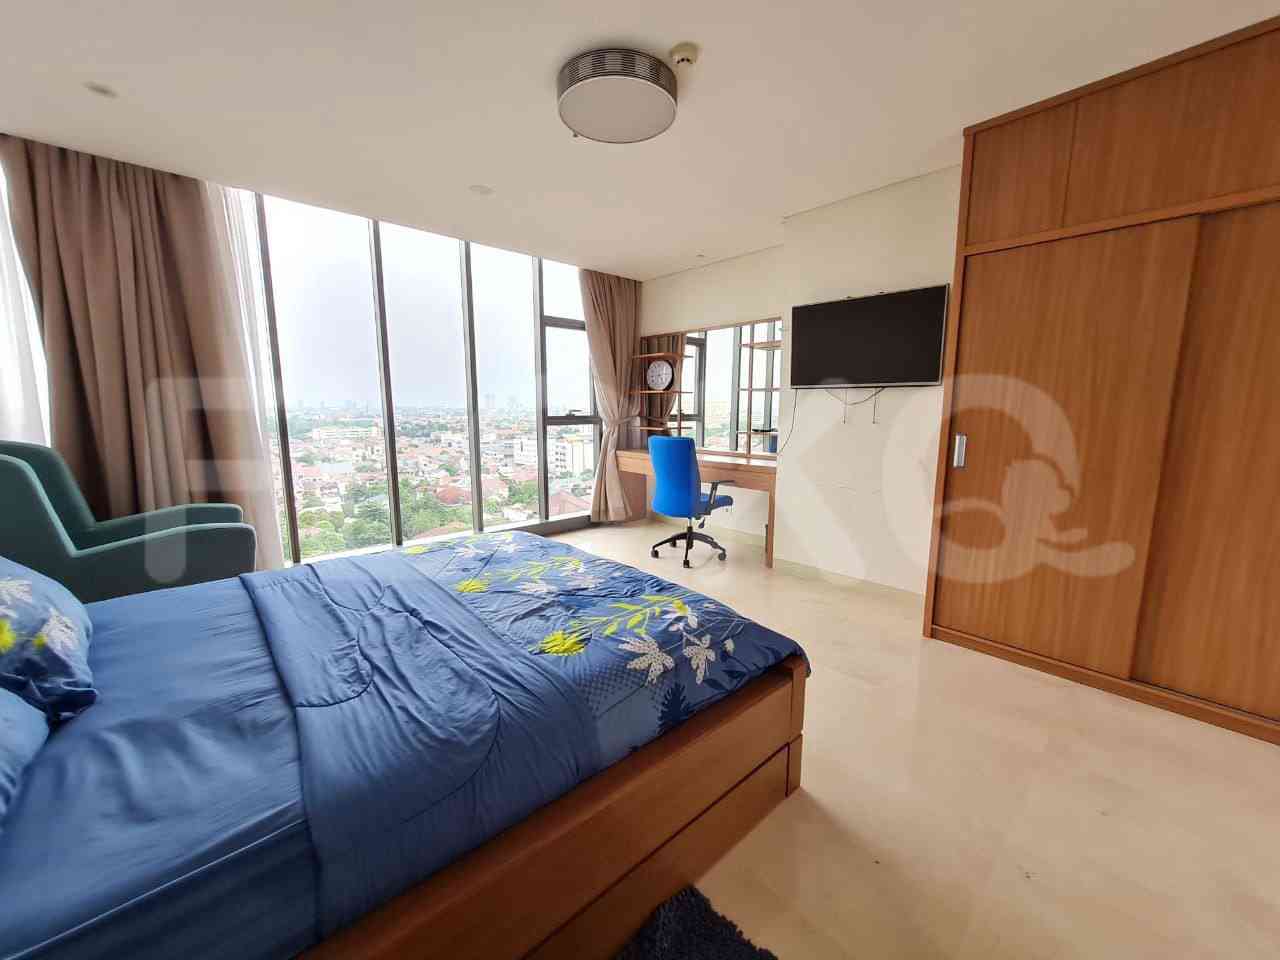 2 Bedroom on 18th Floor for Rent in Lavanue Apartment - fpa481 1